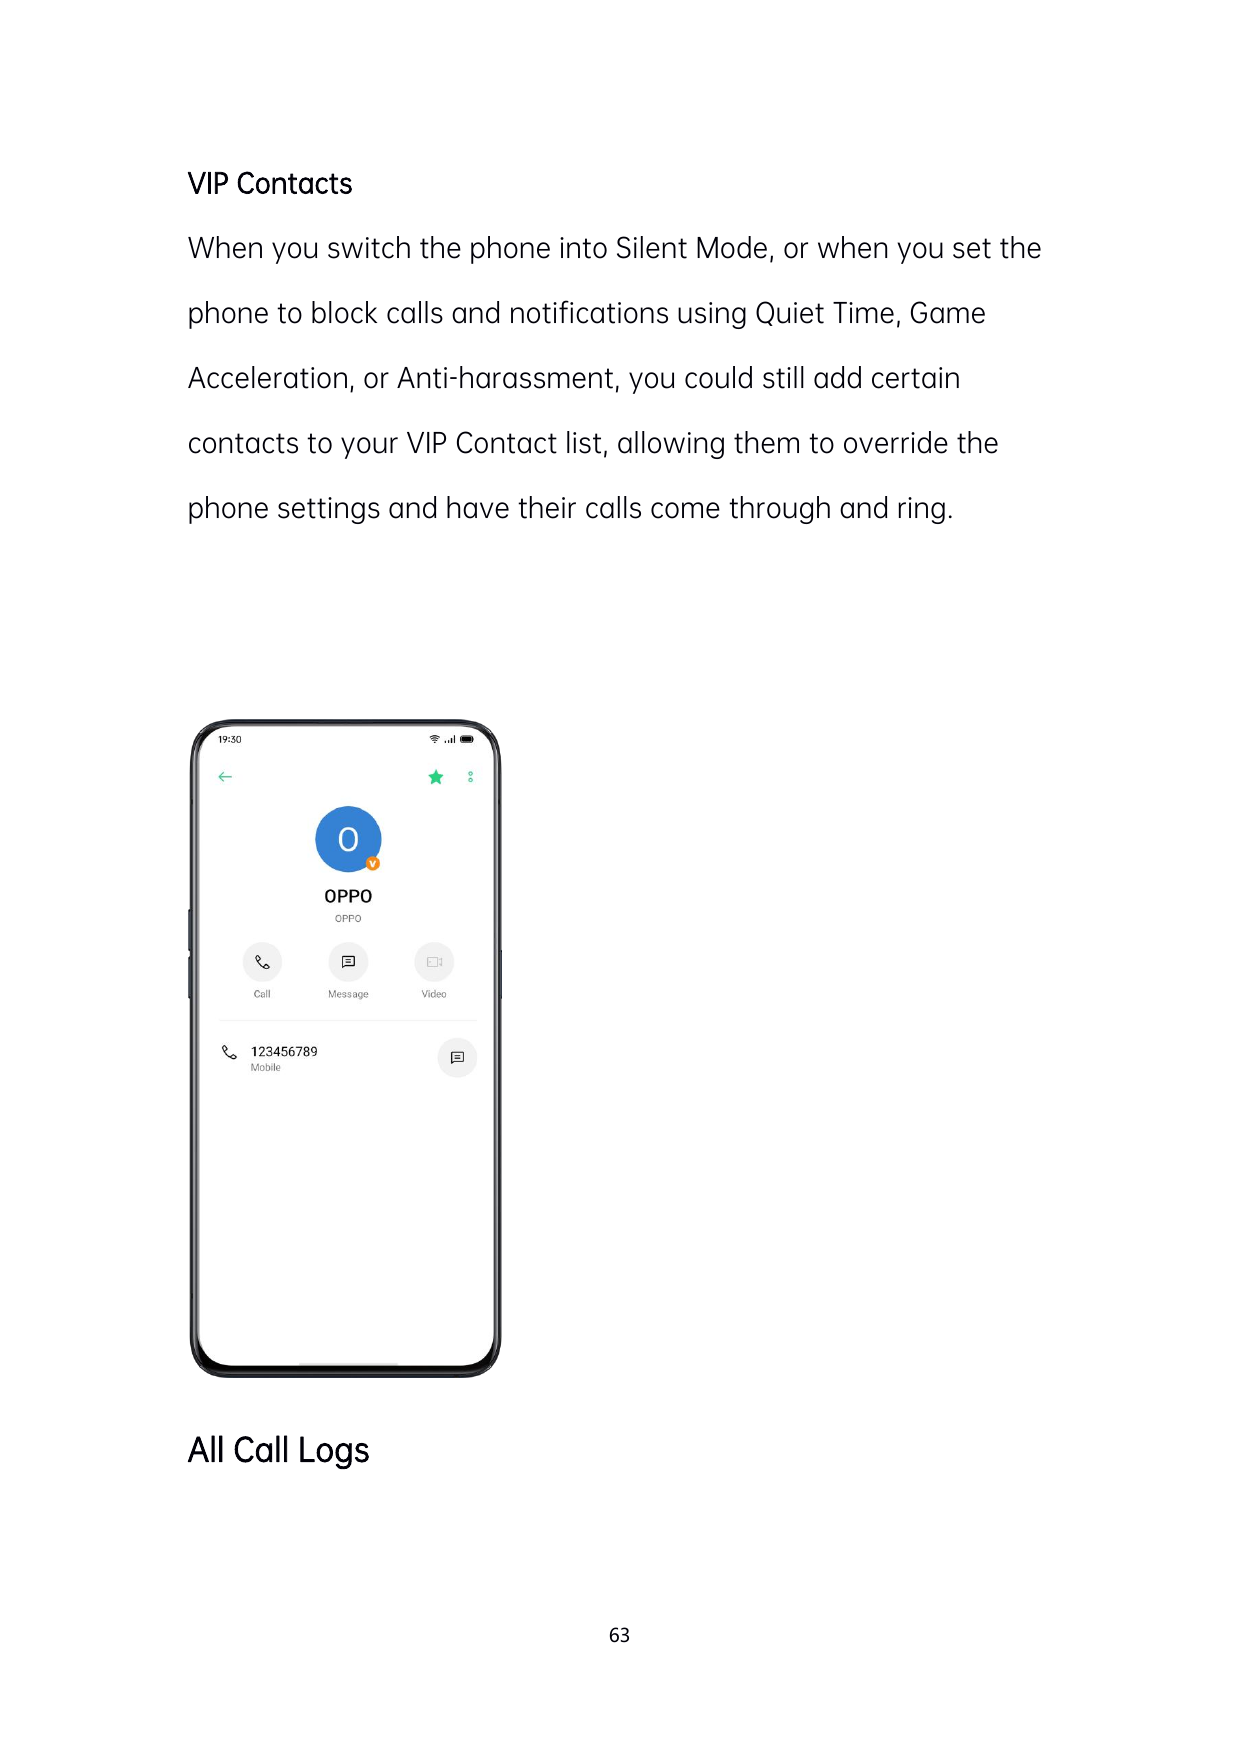 VIP ContactsWhen you switch the phone into Silent Mode, or when you set thephone to block calls and notifications using Quiet Ti